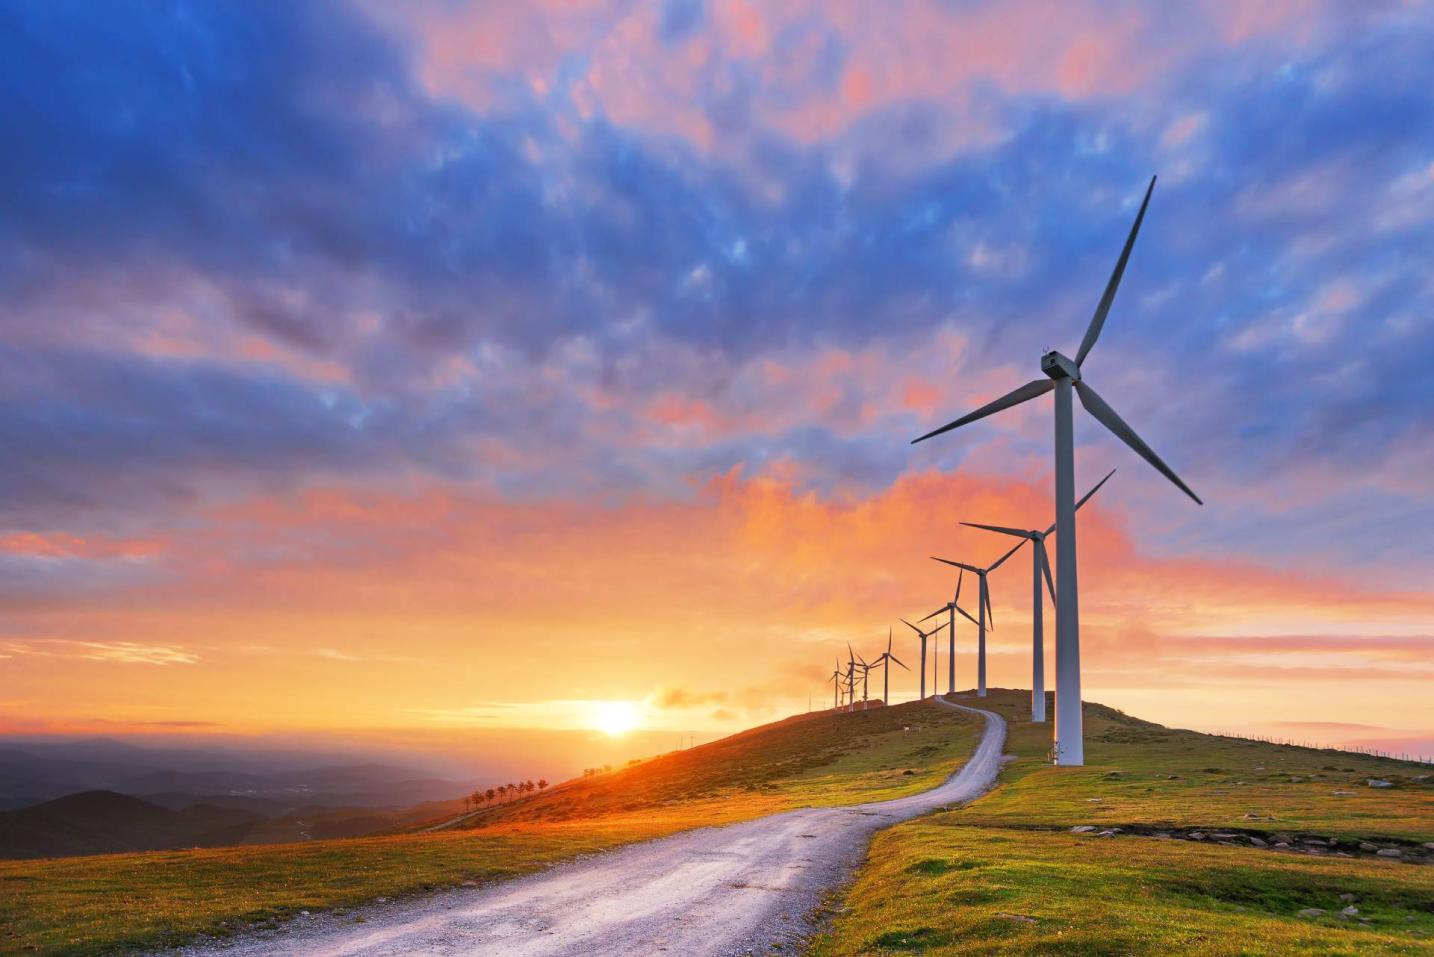 How Can We Make Wind Energy More Affordable?